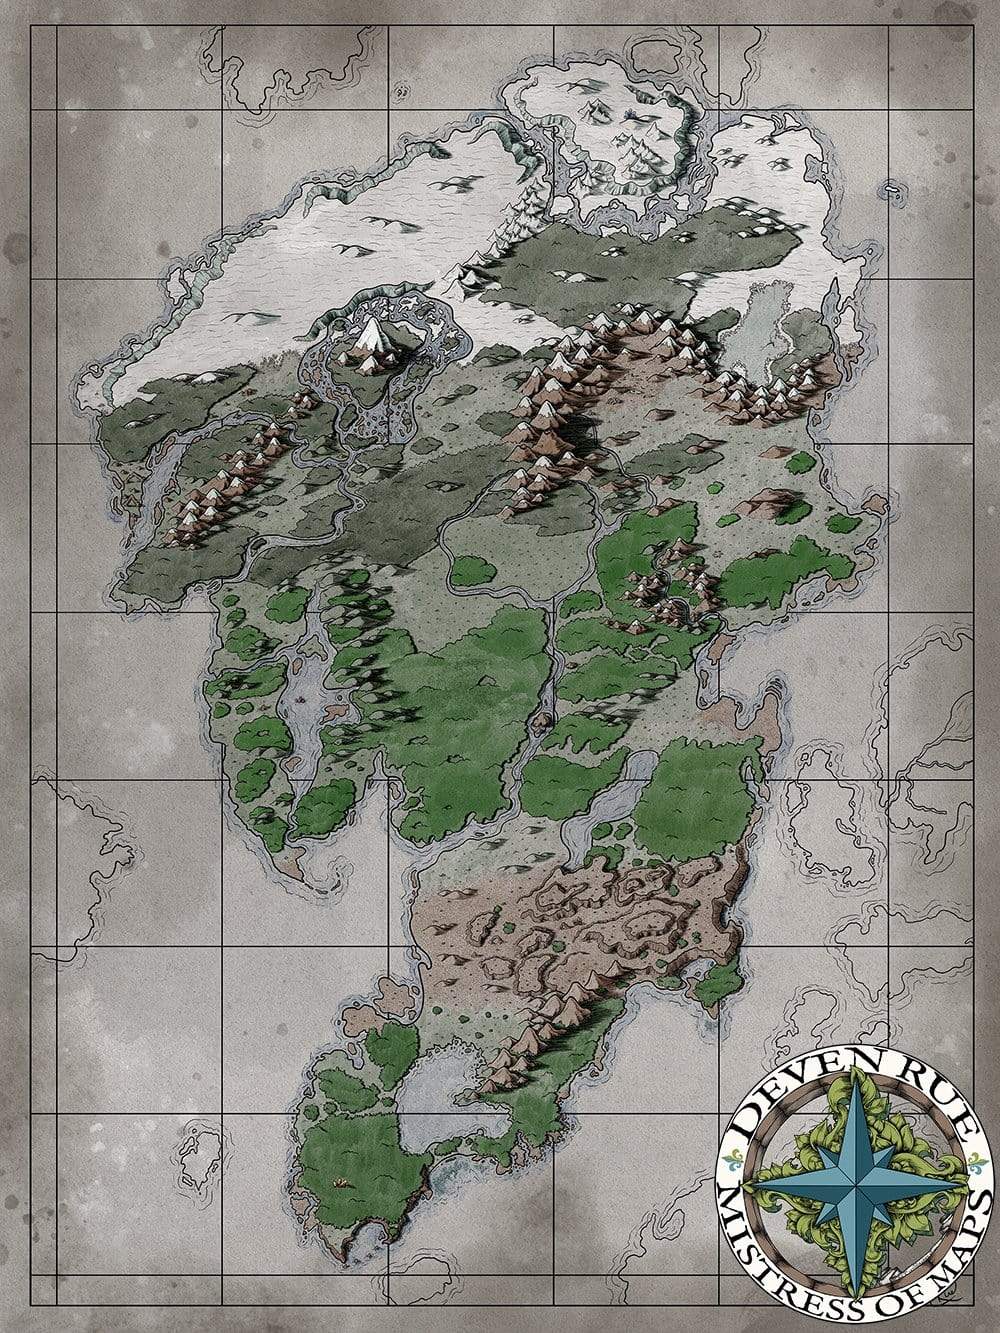 A preview of an unlabeled map from the Ayon VTT map pack by Deven Rue.